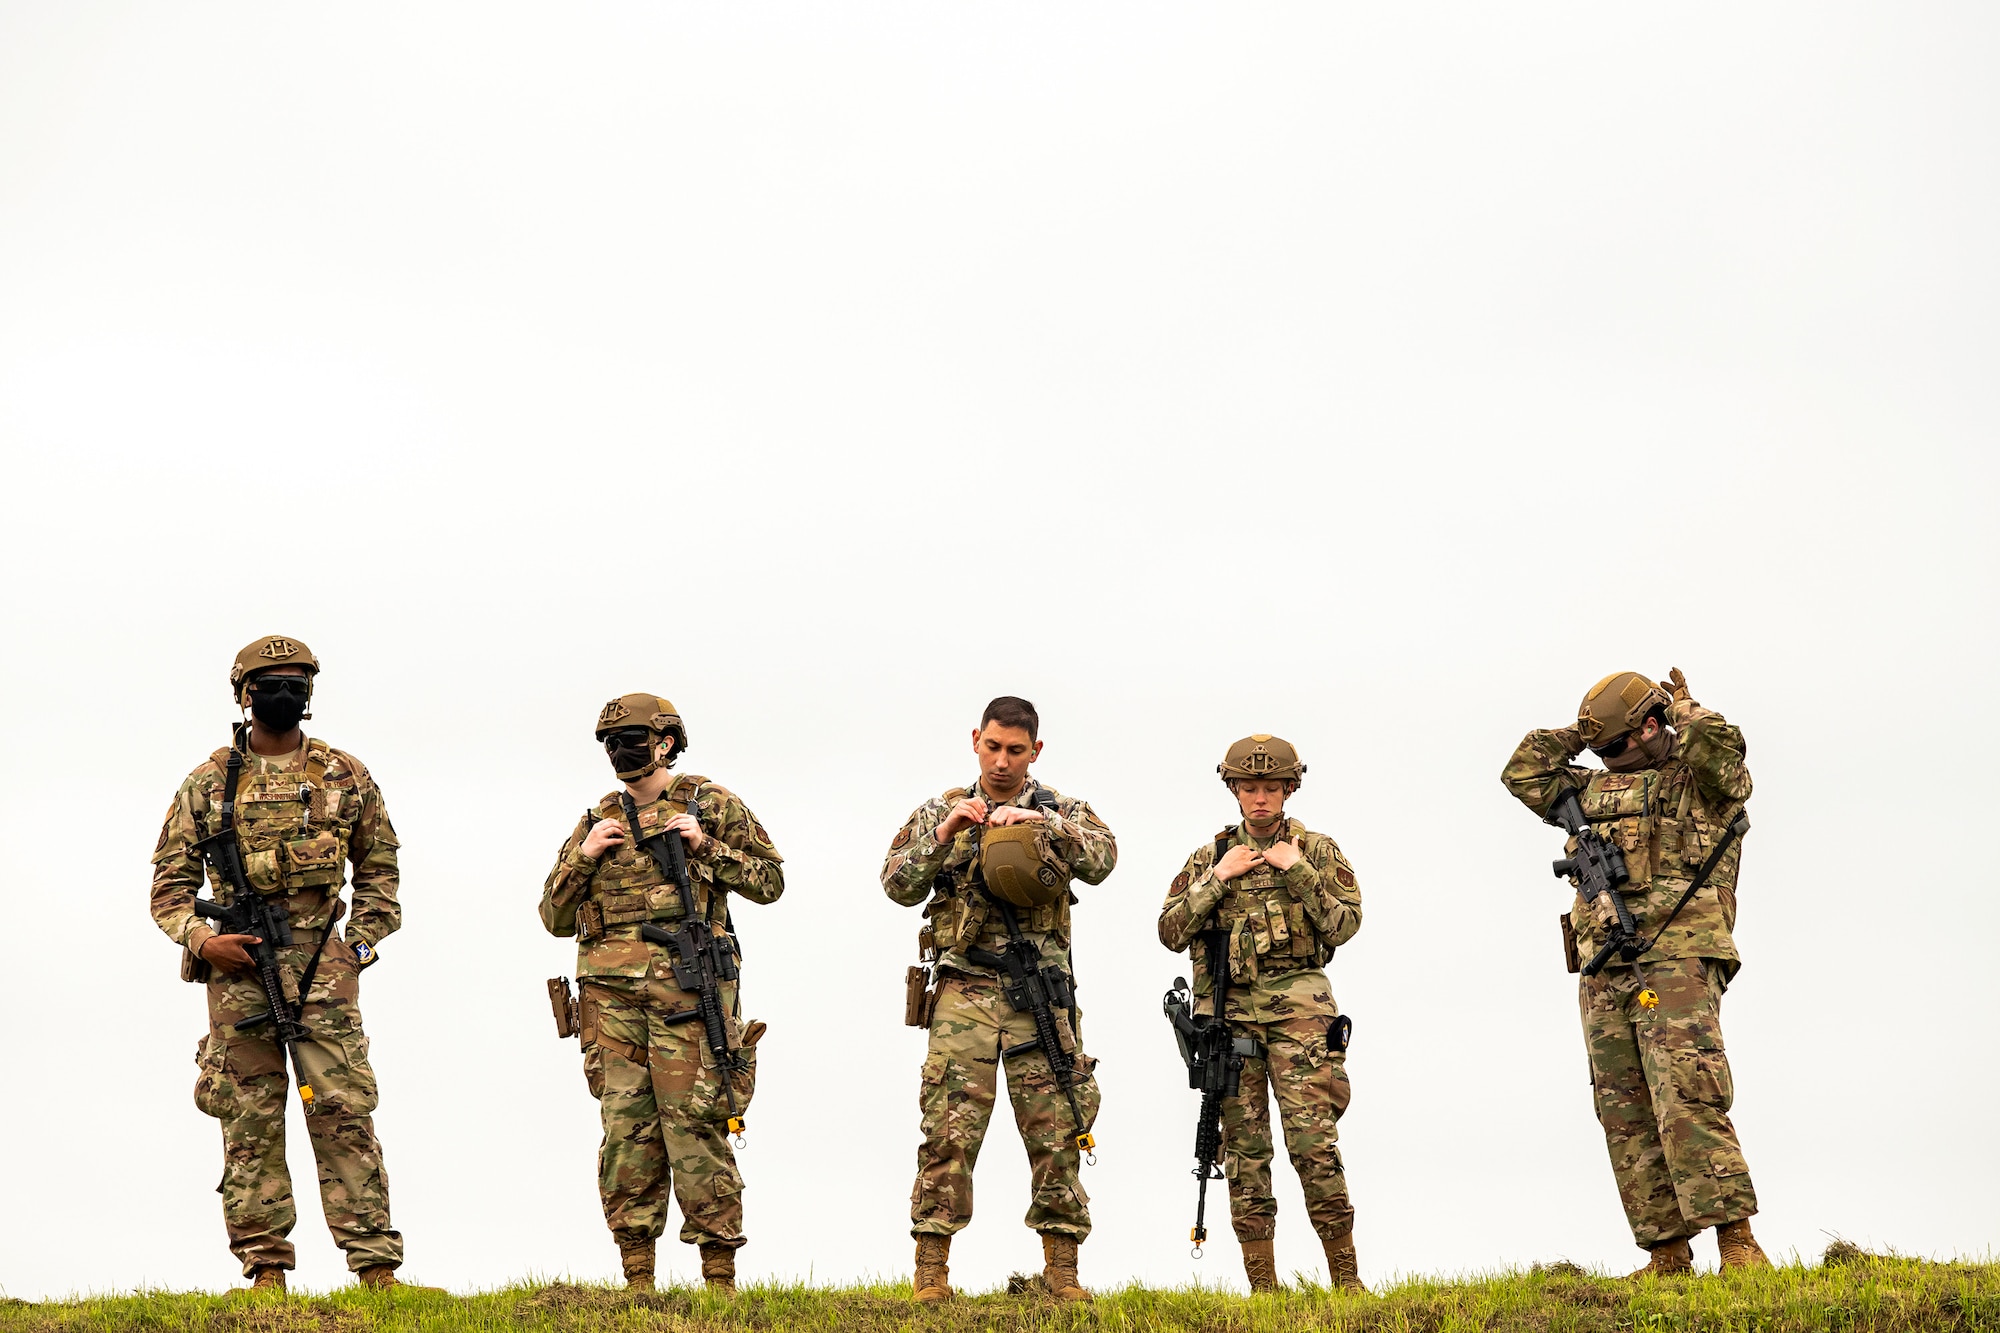 Airmen from the 422nd Security Forces Squadron, gear up prior to a tri-agency active shooter response exercise at RAF Croughton, England, June 30, 2021. Airmen from the 422nd SFS along with police officers from the Northamptonshire Police Department and Ministry of Defense, participated in multiple exercises to enhance their search and seizure tactics, strengthen local ties and gain rapport with their fellow officers. (U.S. Air Force photo by Senior Airman Eugene Oliver)